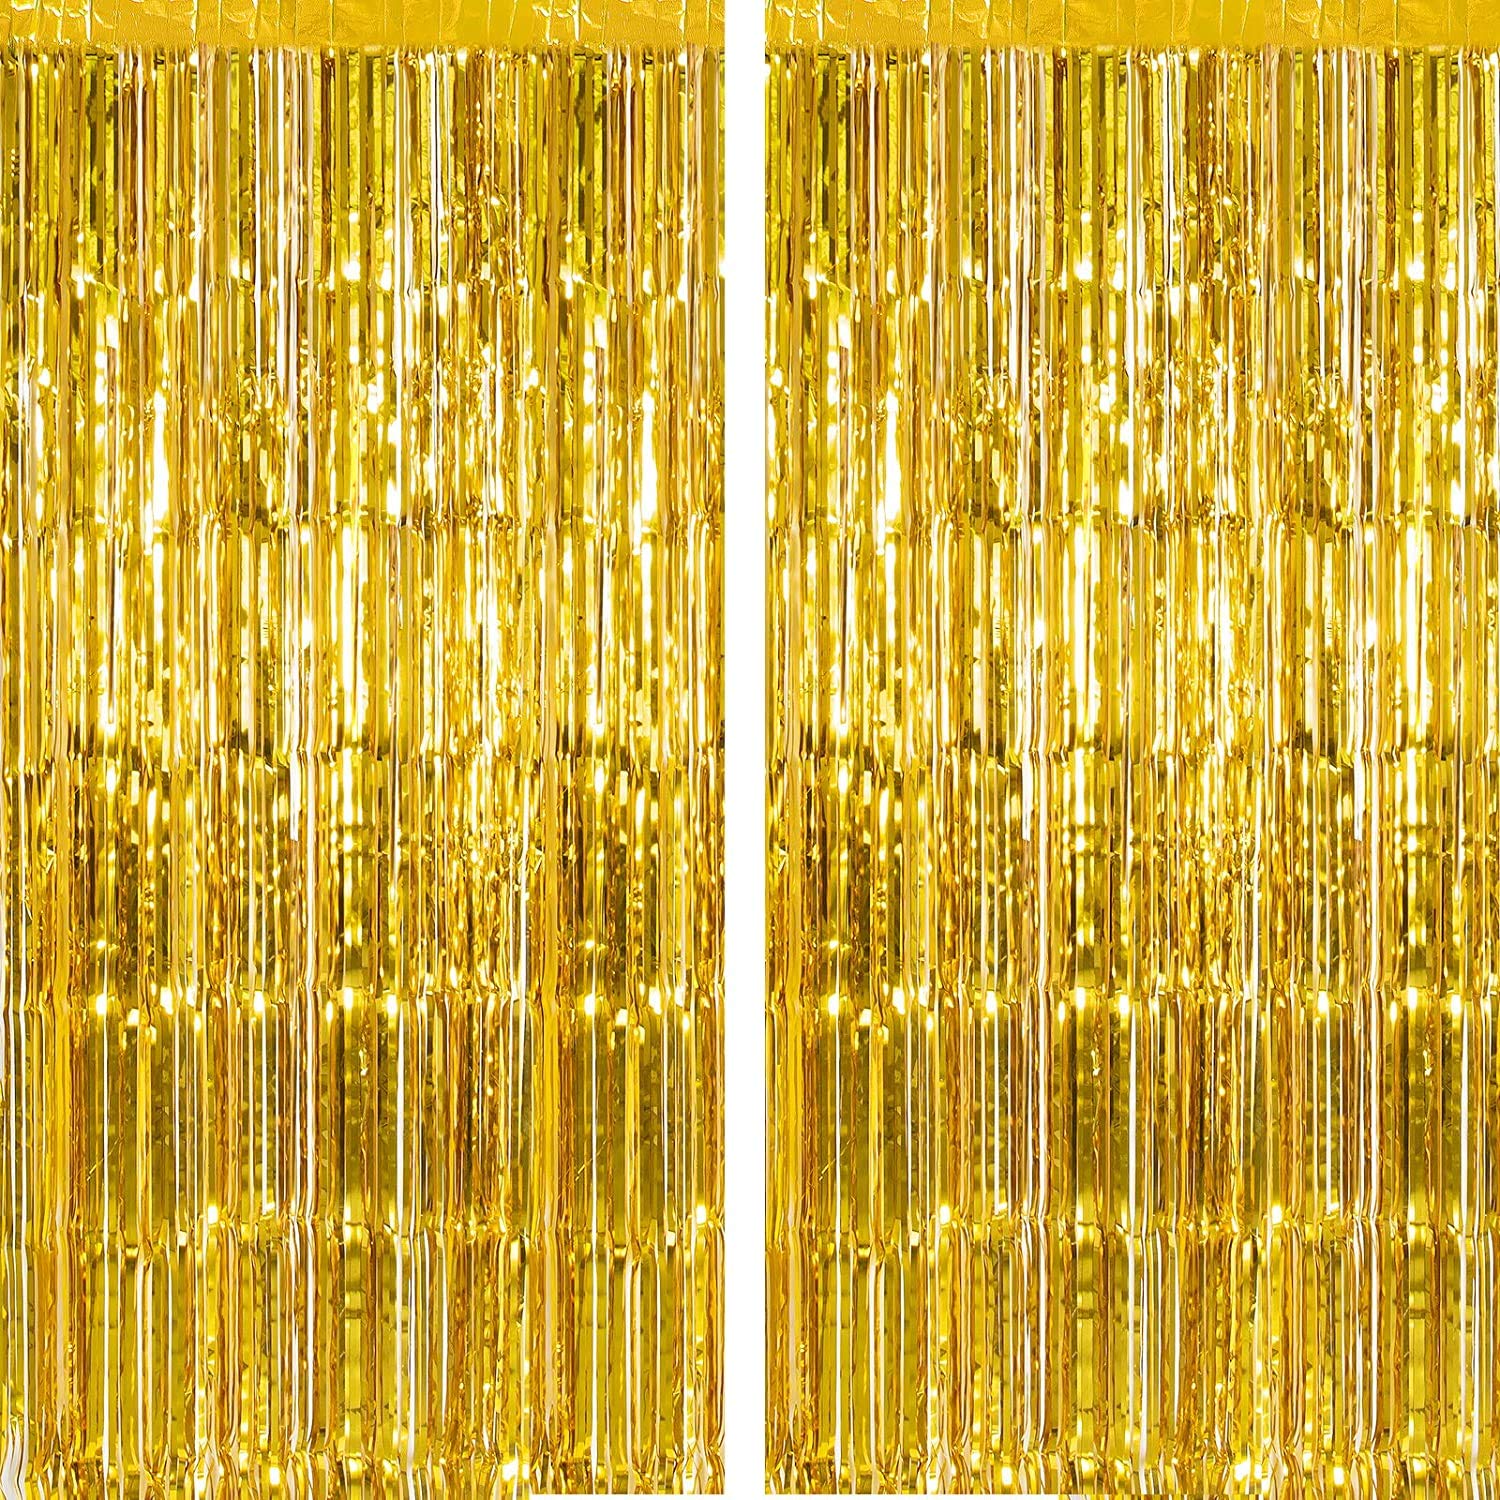 Metallic Foil Fringe Curtains for Party Photo Backdrop Wedding Birthday Decor (2 Pack, Gold) – 3 X 6 ft